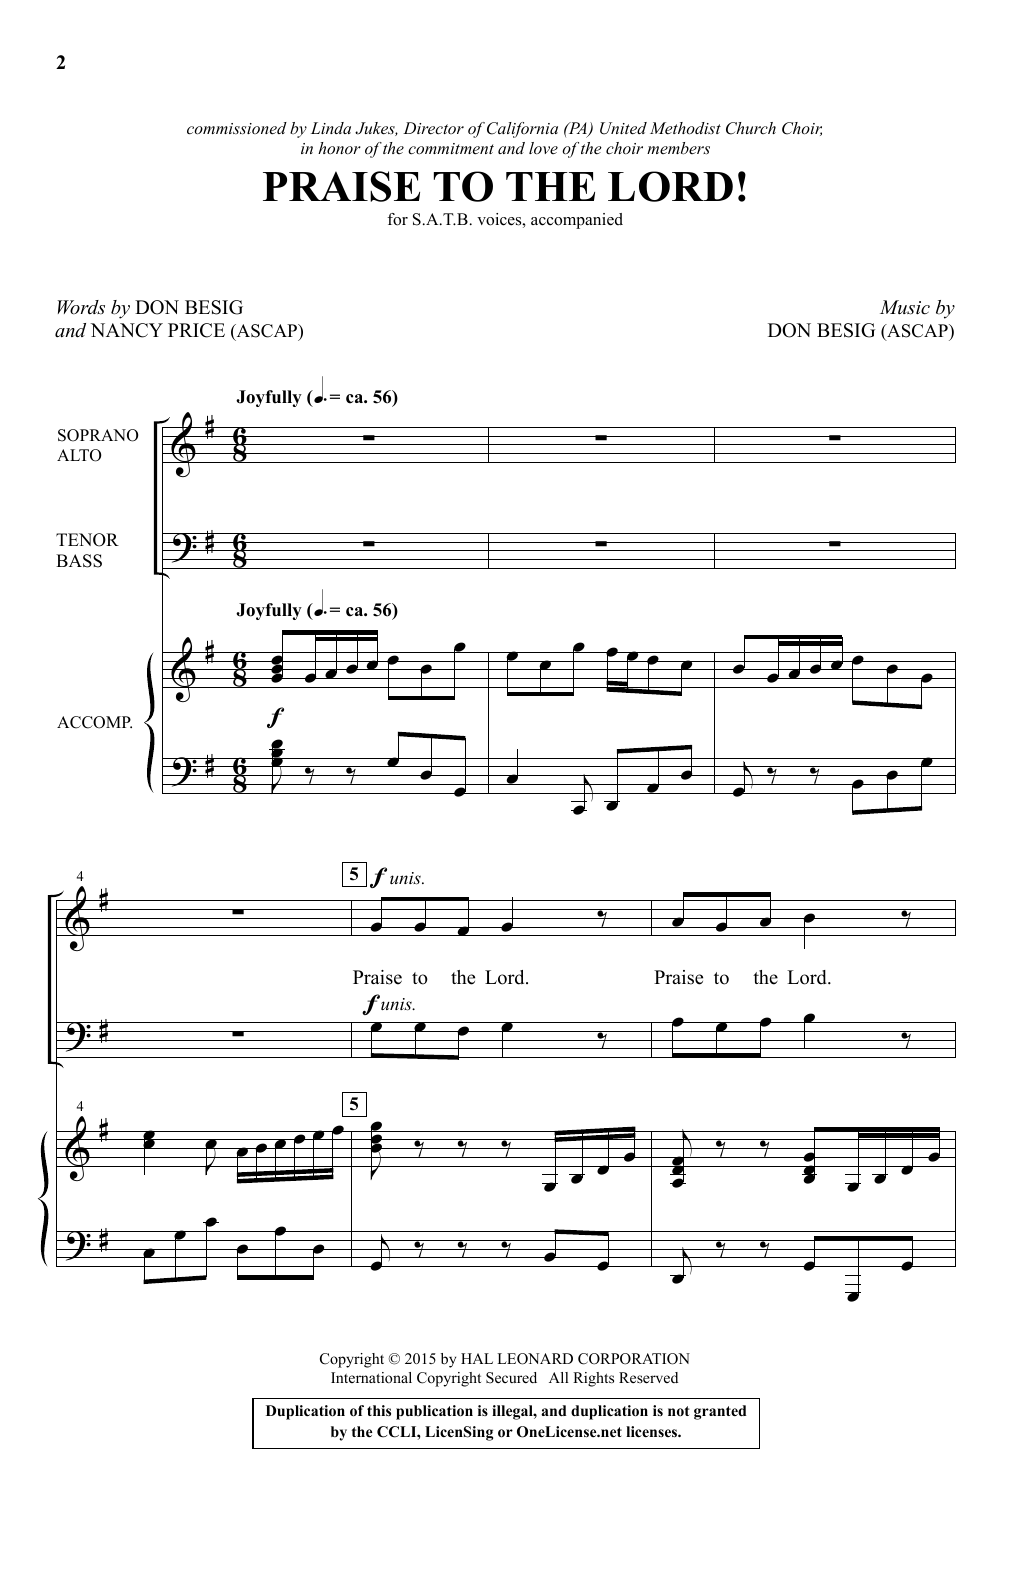 Download Don Besig Praise To The Lord! Sheet Music